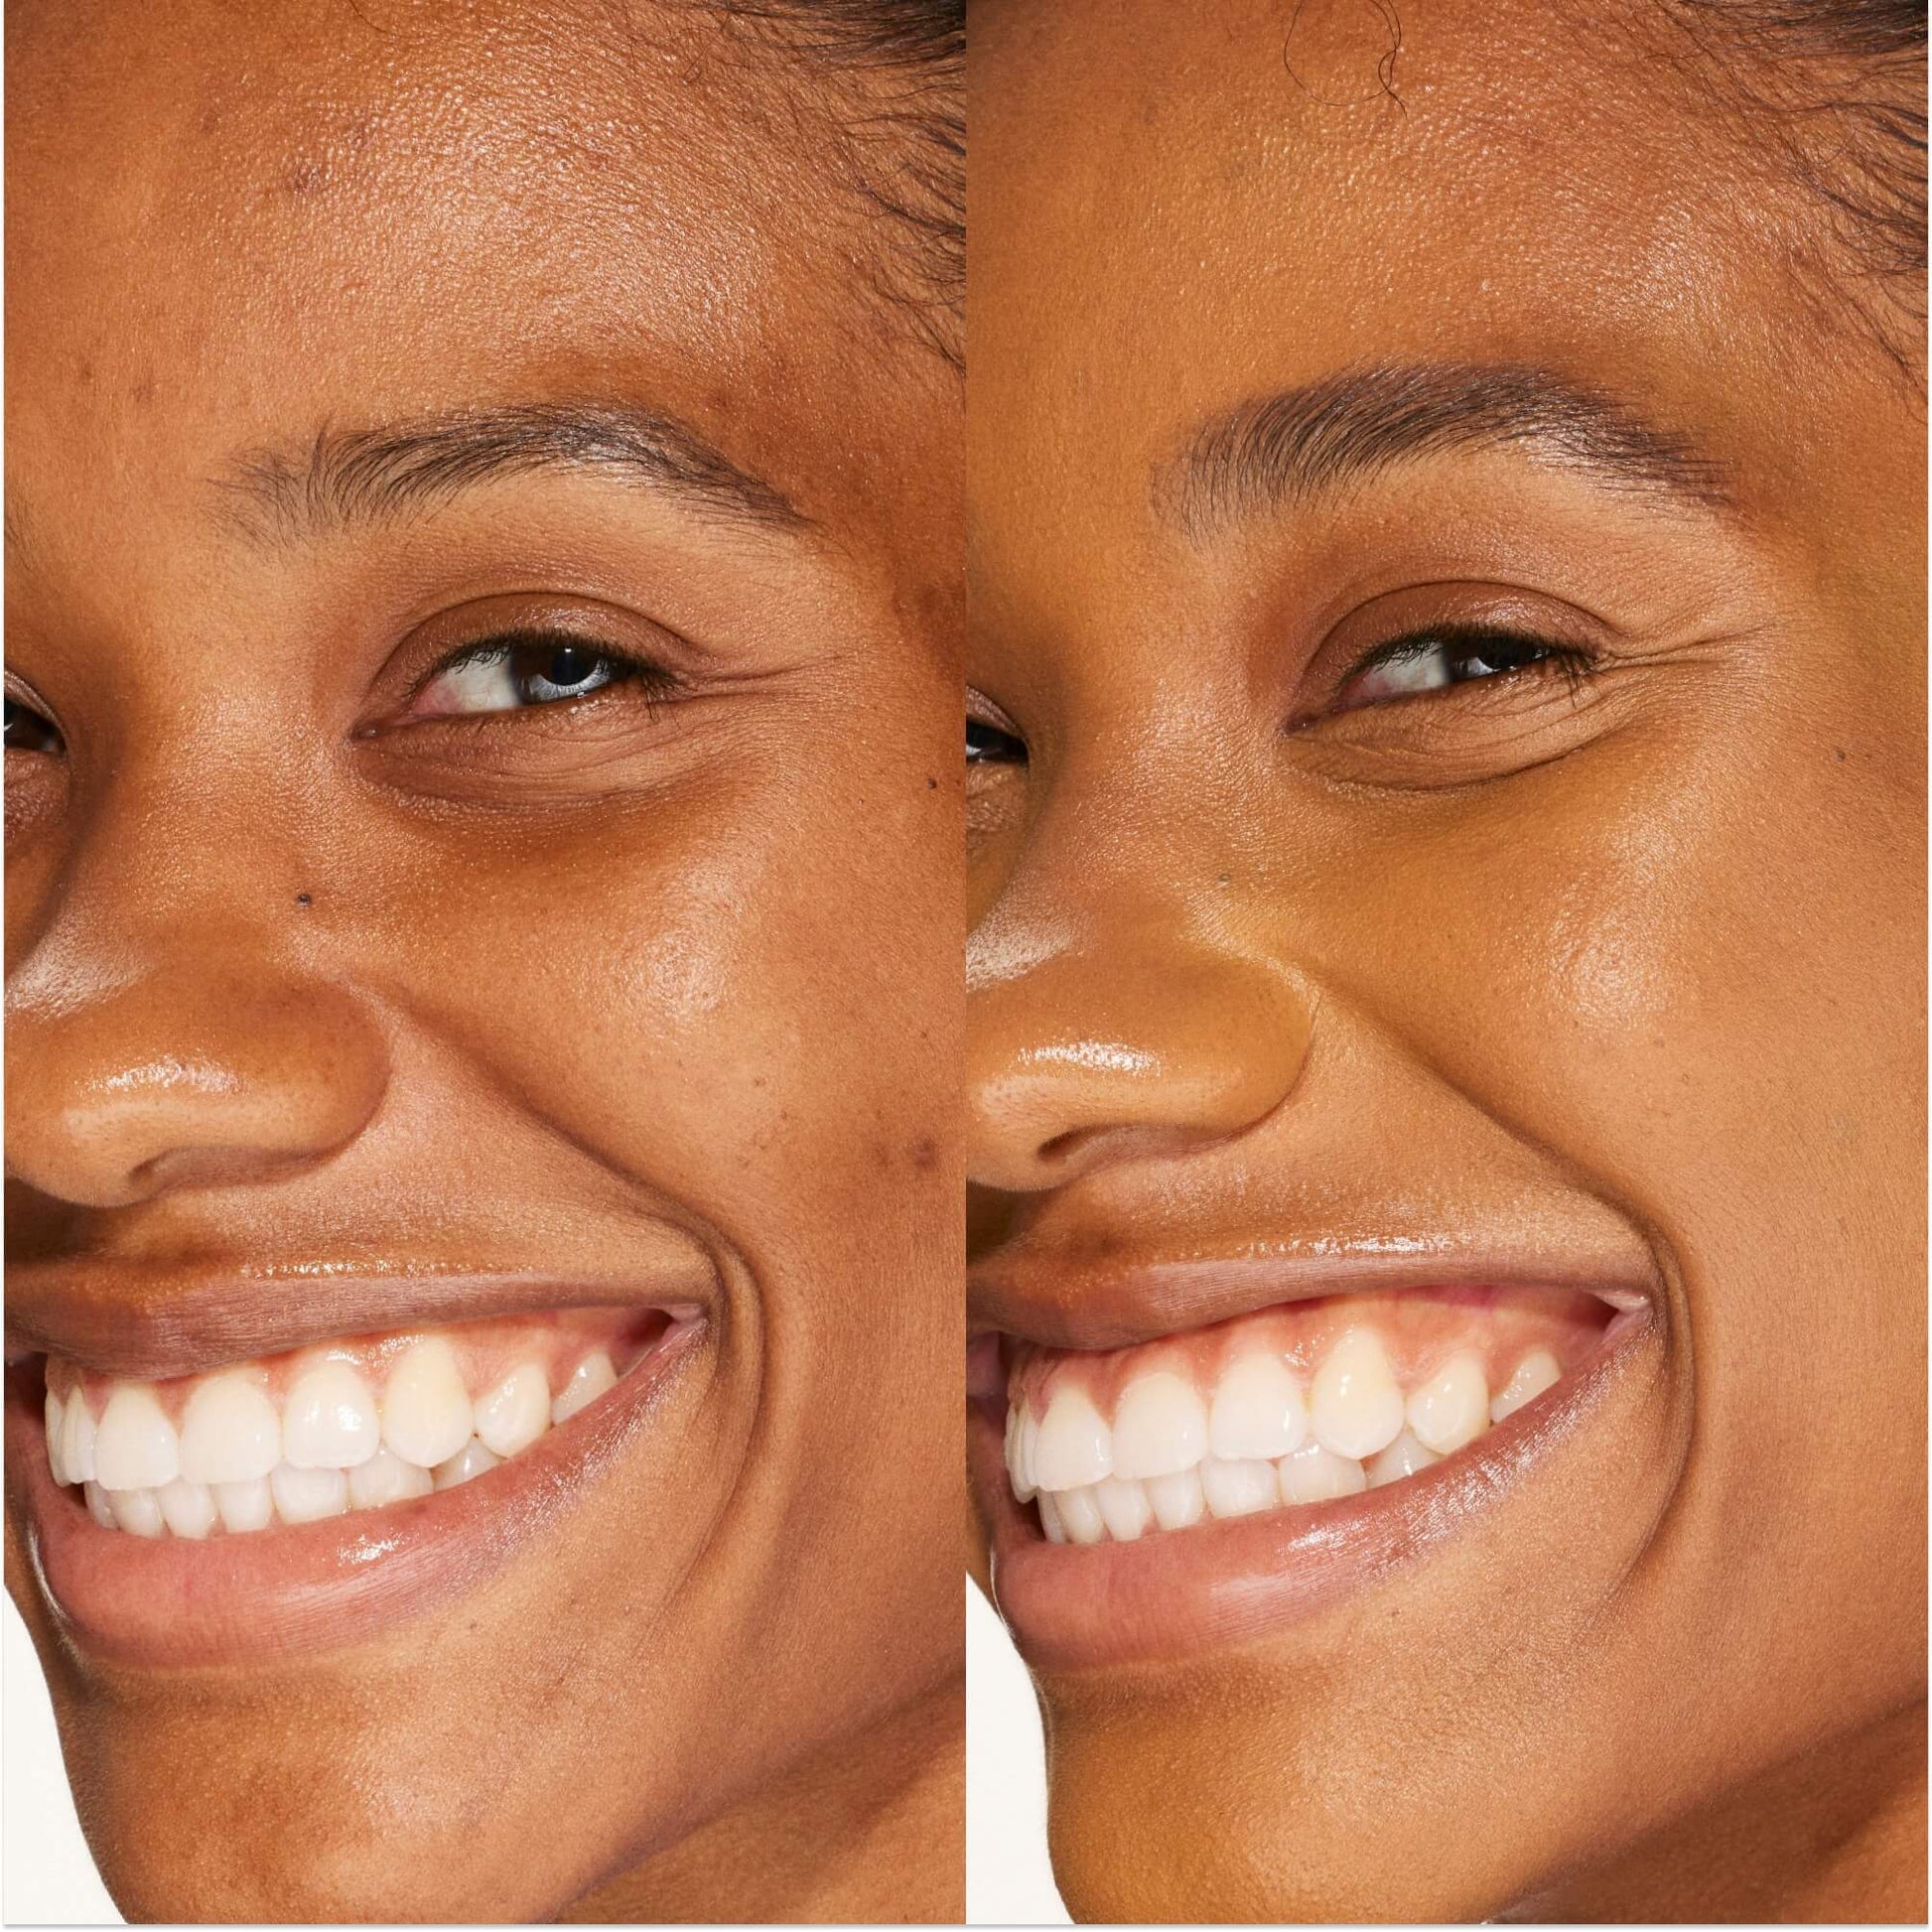 A person's face before and after using Tower 28 Beauty's Swipe Serum Concealer in shade 14.0 PV to cover up dark circles, blemishes, and discoloration